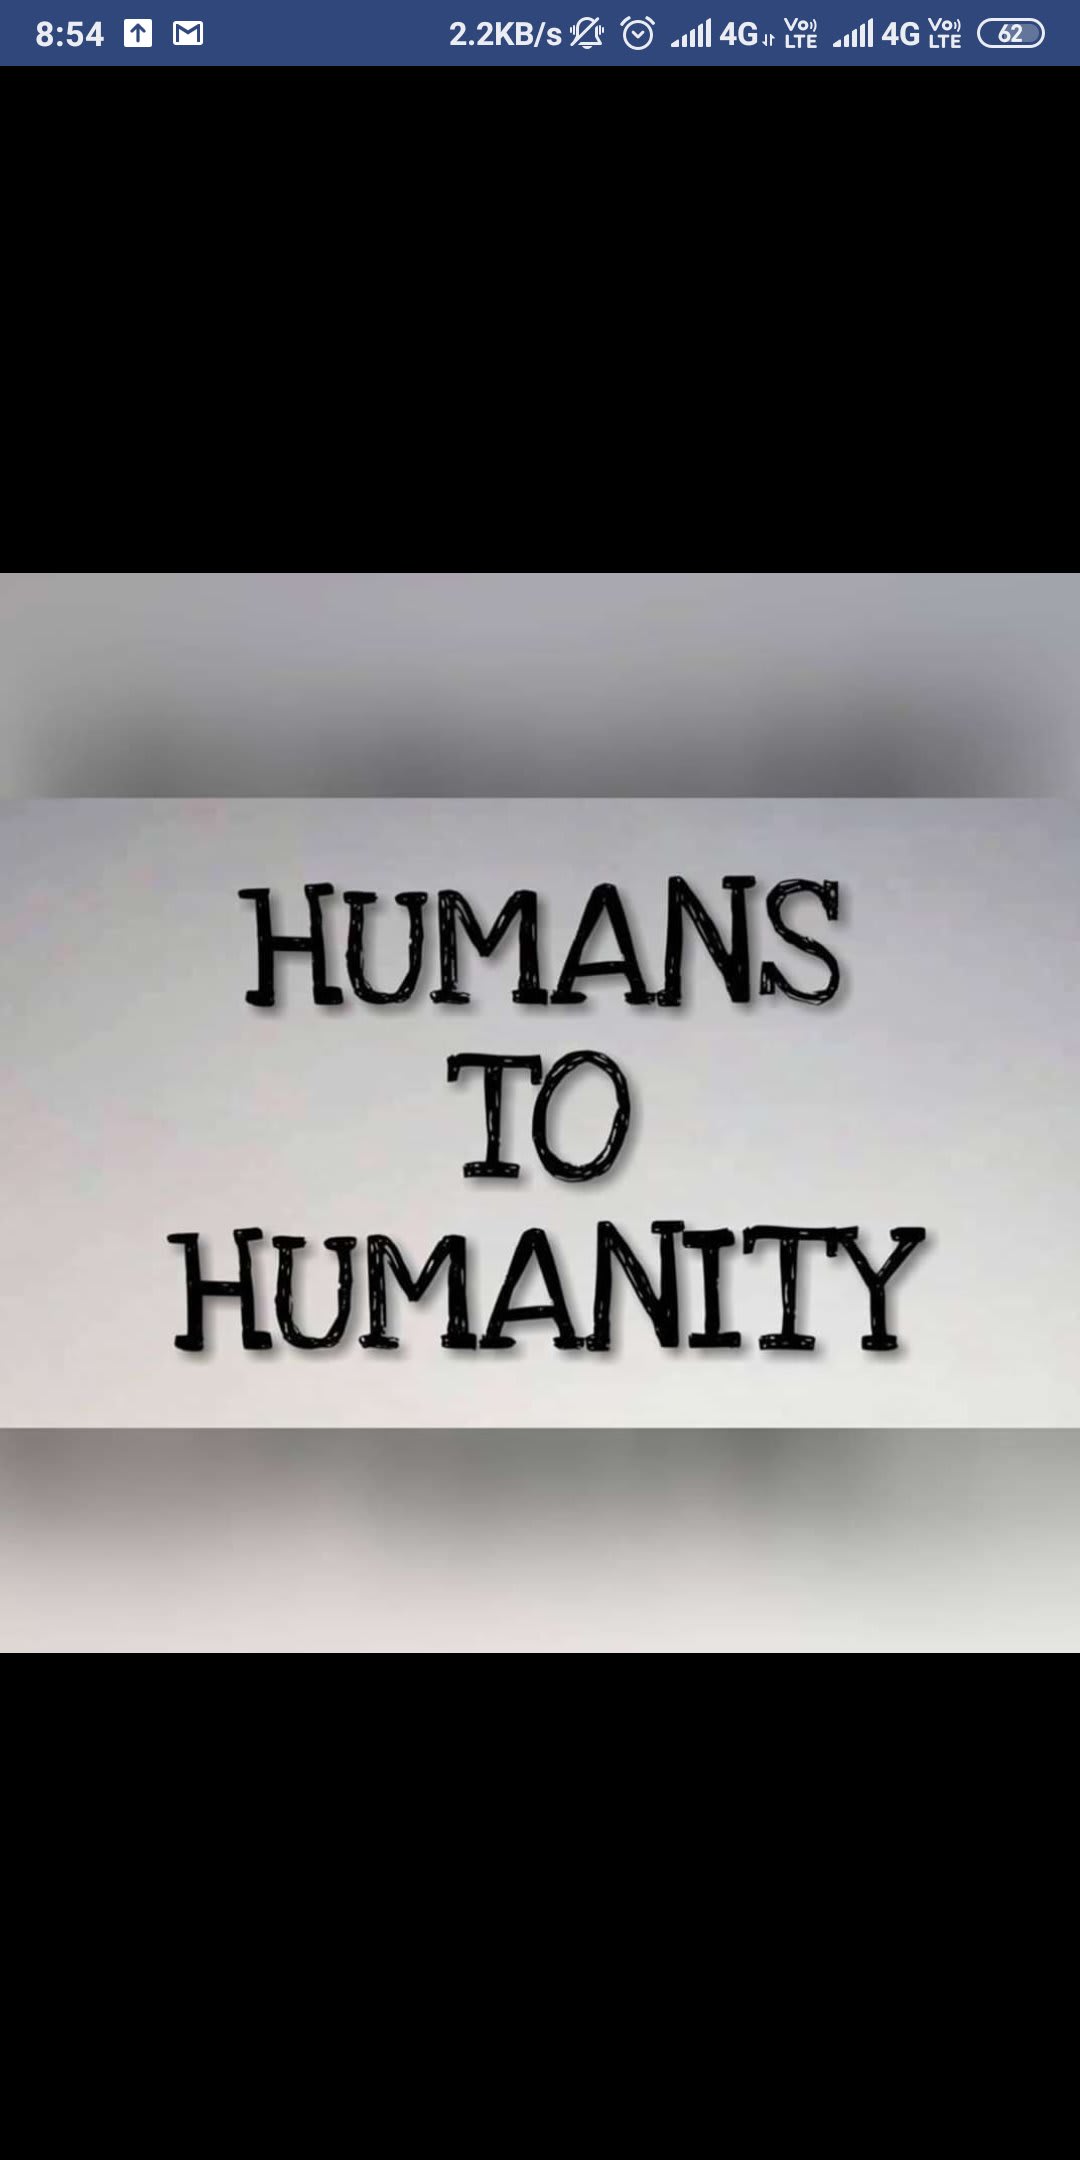 Humans to Humanity